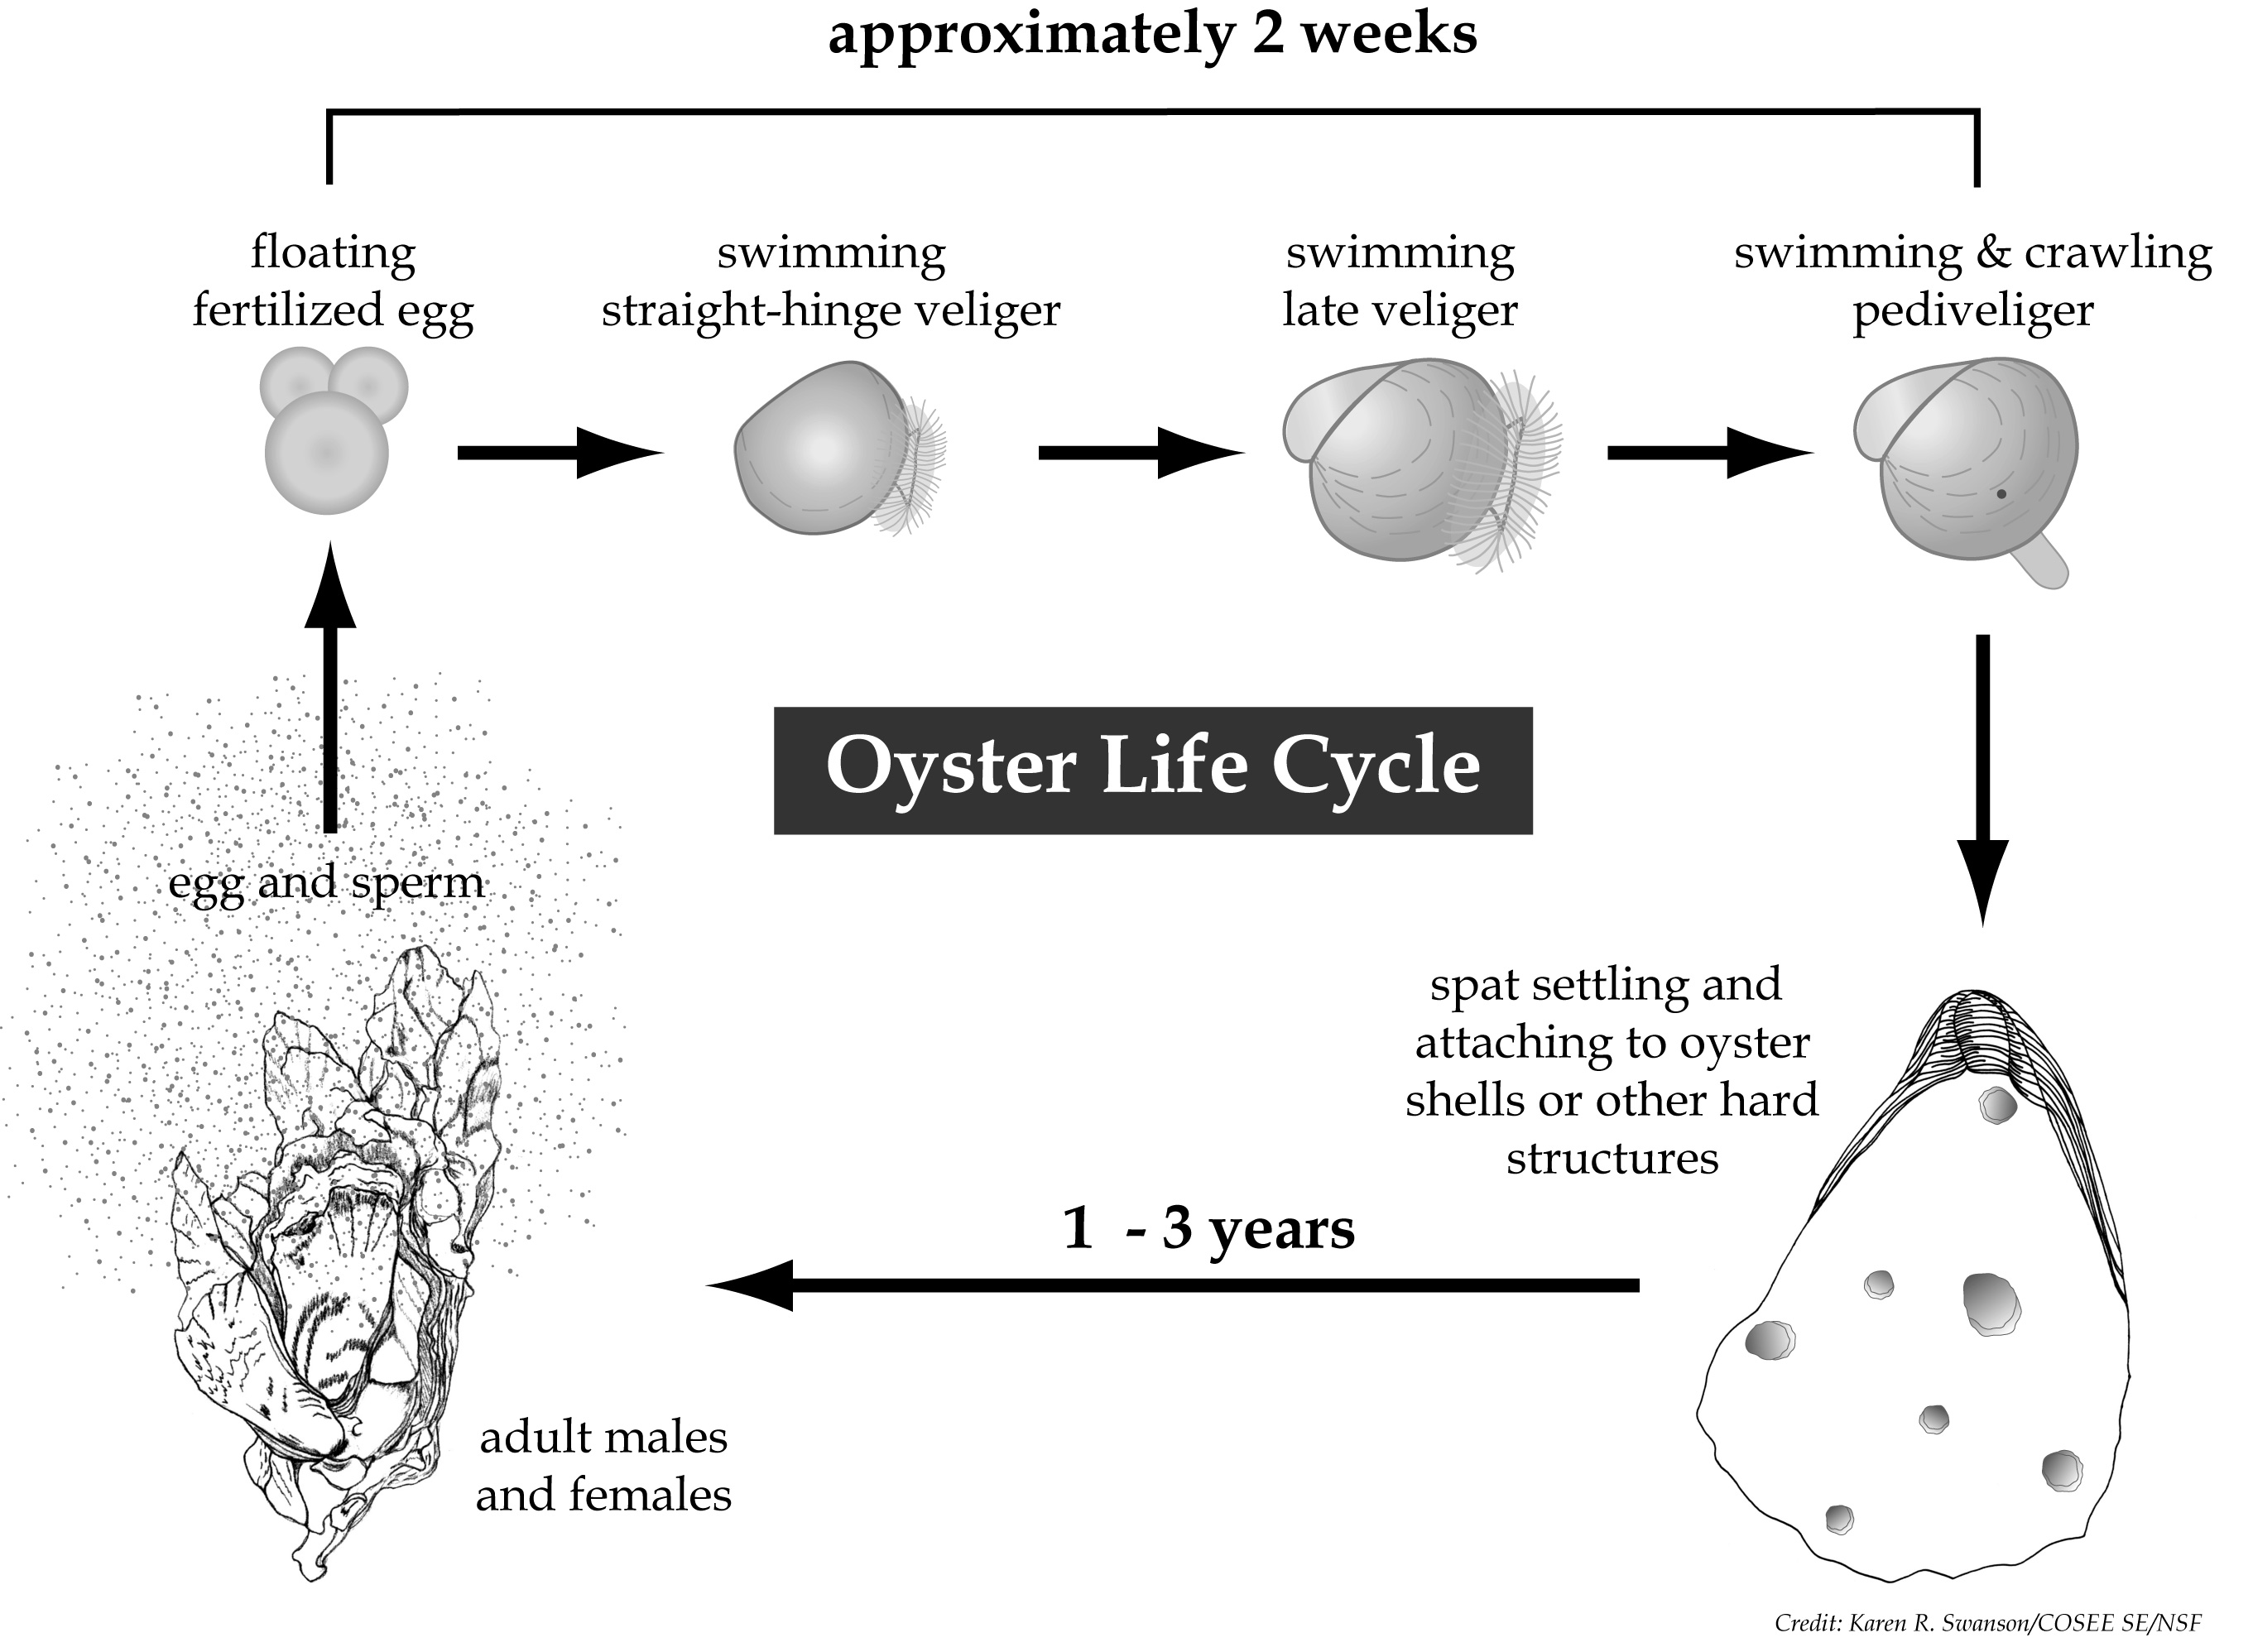 Figure of the oyster life cycle, from egg to veliger larva to pediveliger stage to attached juvenile (spat) to adult, and back to egg.